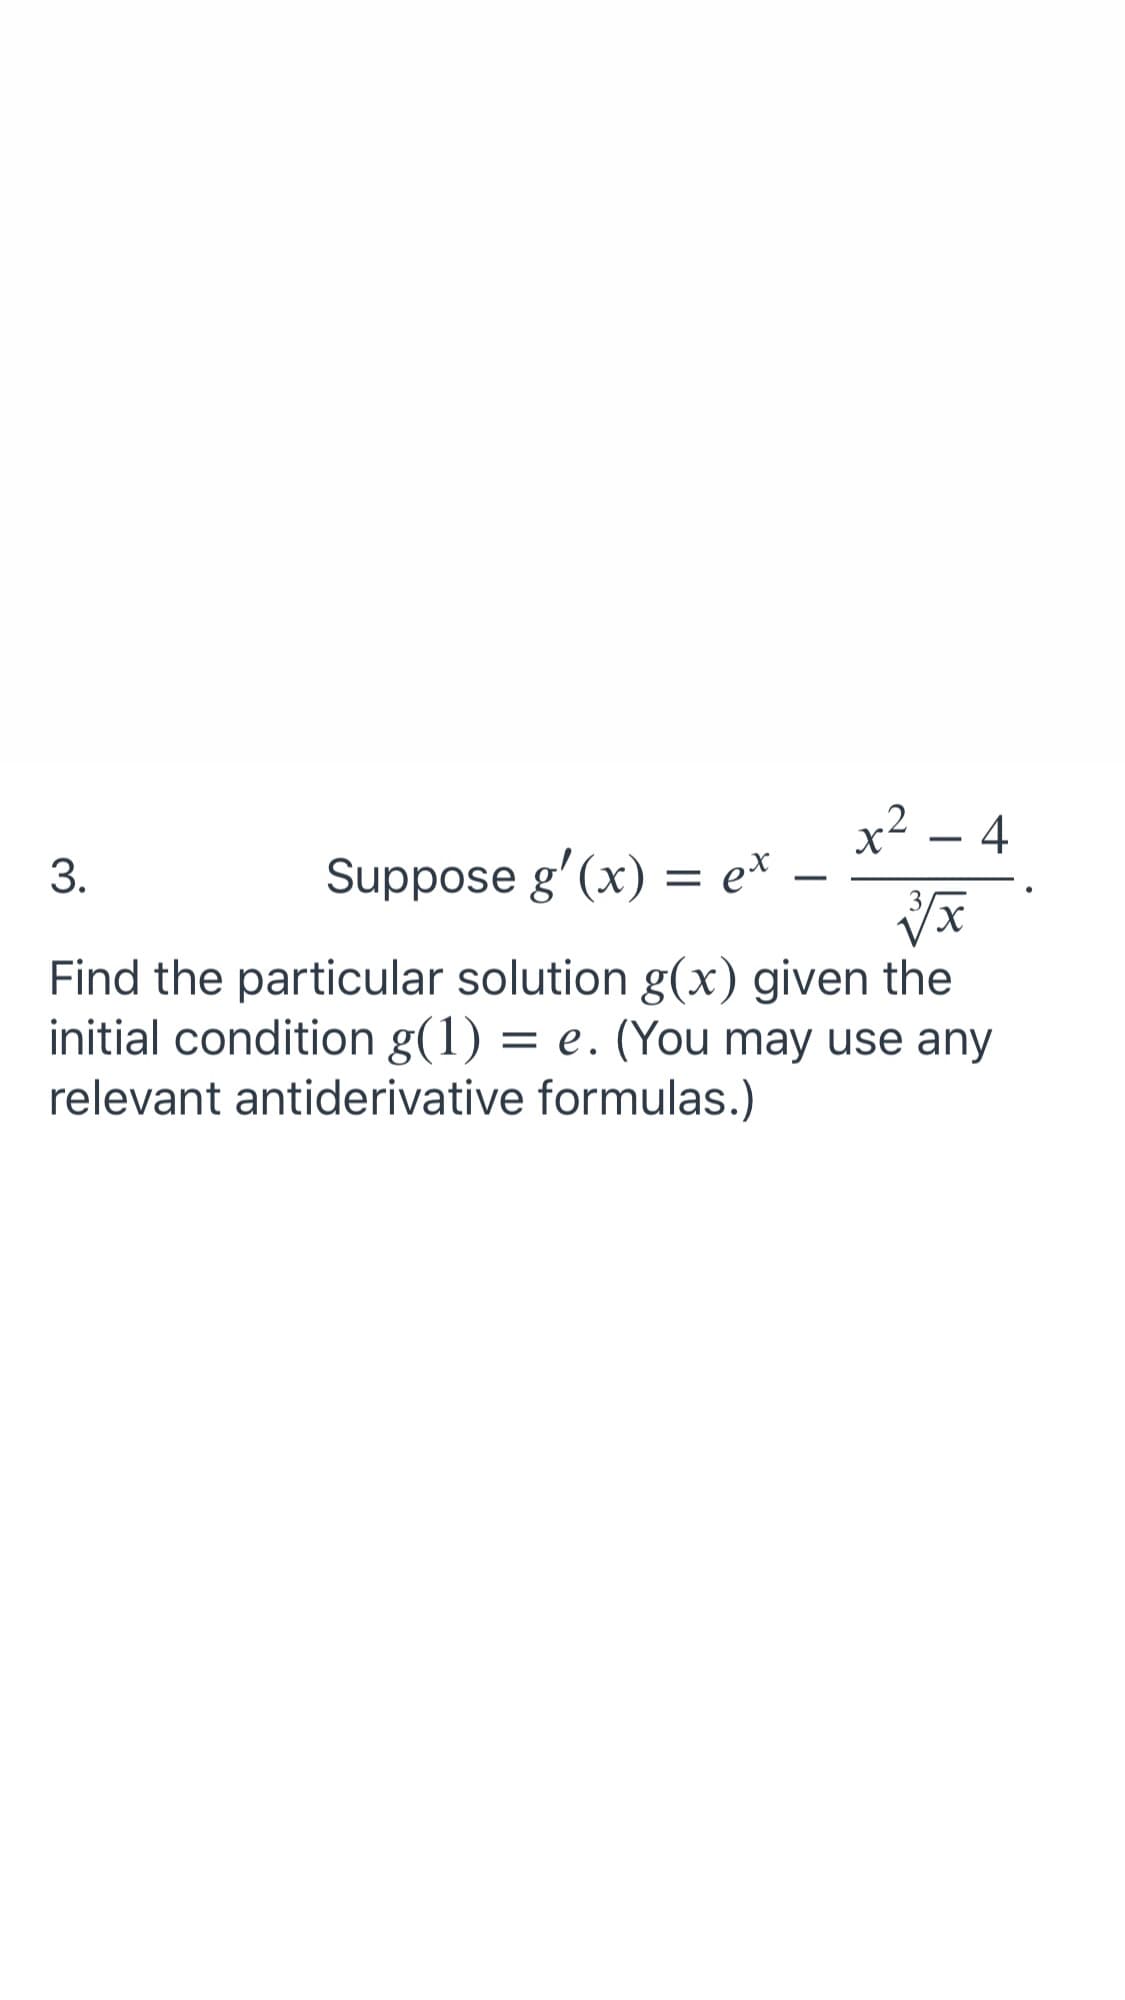 x2
Suppose g'(x) = e*
4
3.
-
Find the particular solution g(x) given the
initial condition g(1) = e. (You may use any
relevant antiderivative formulas.)
